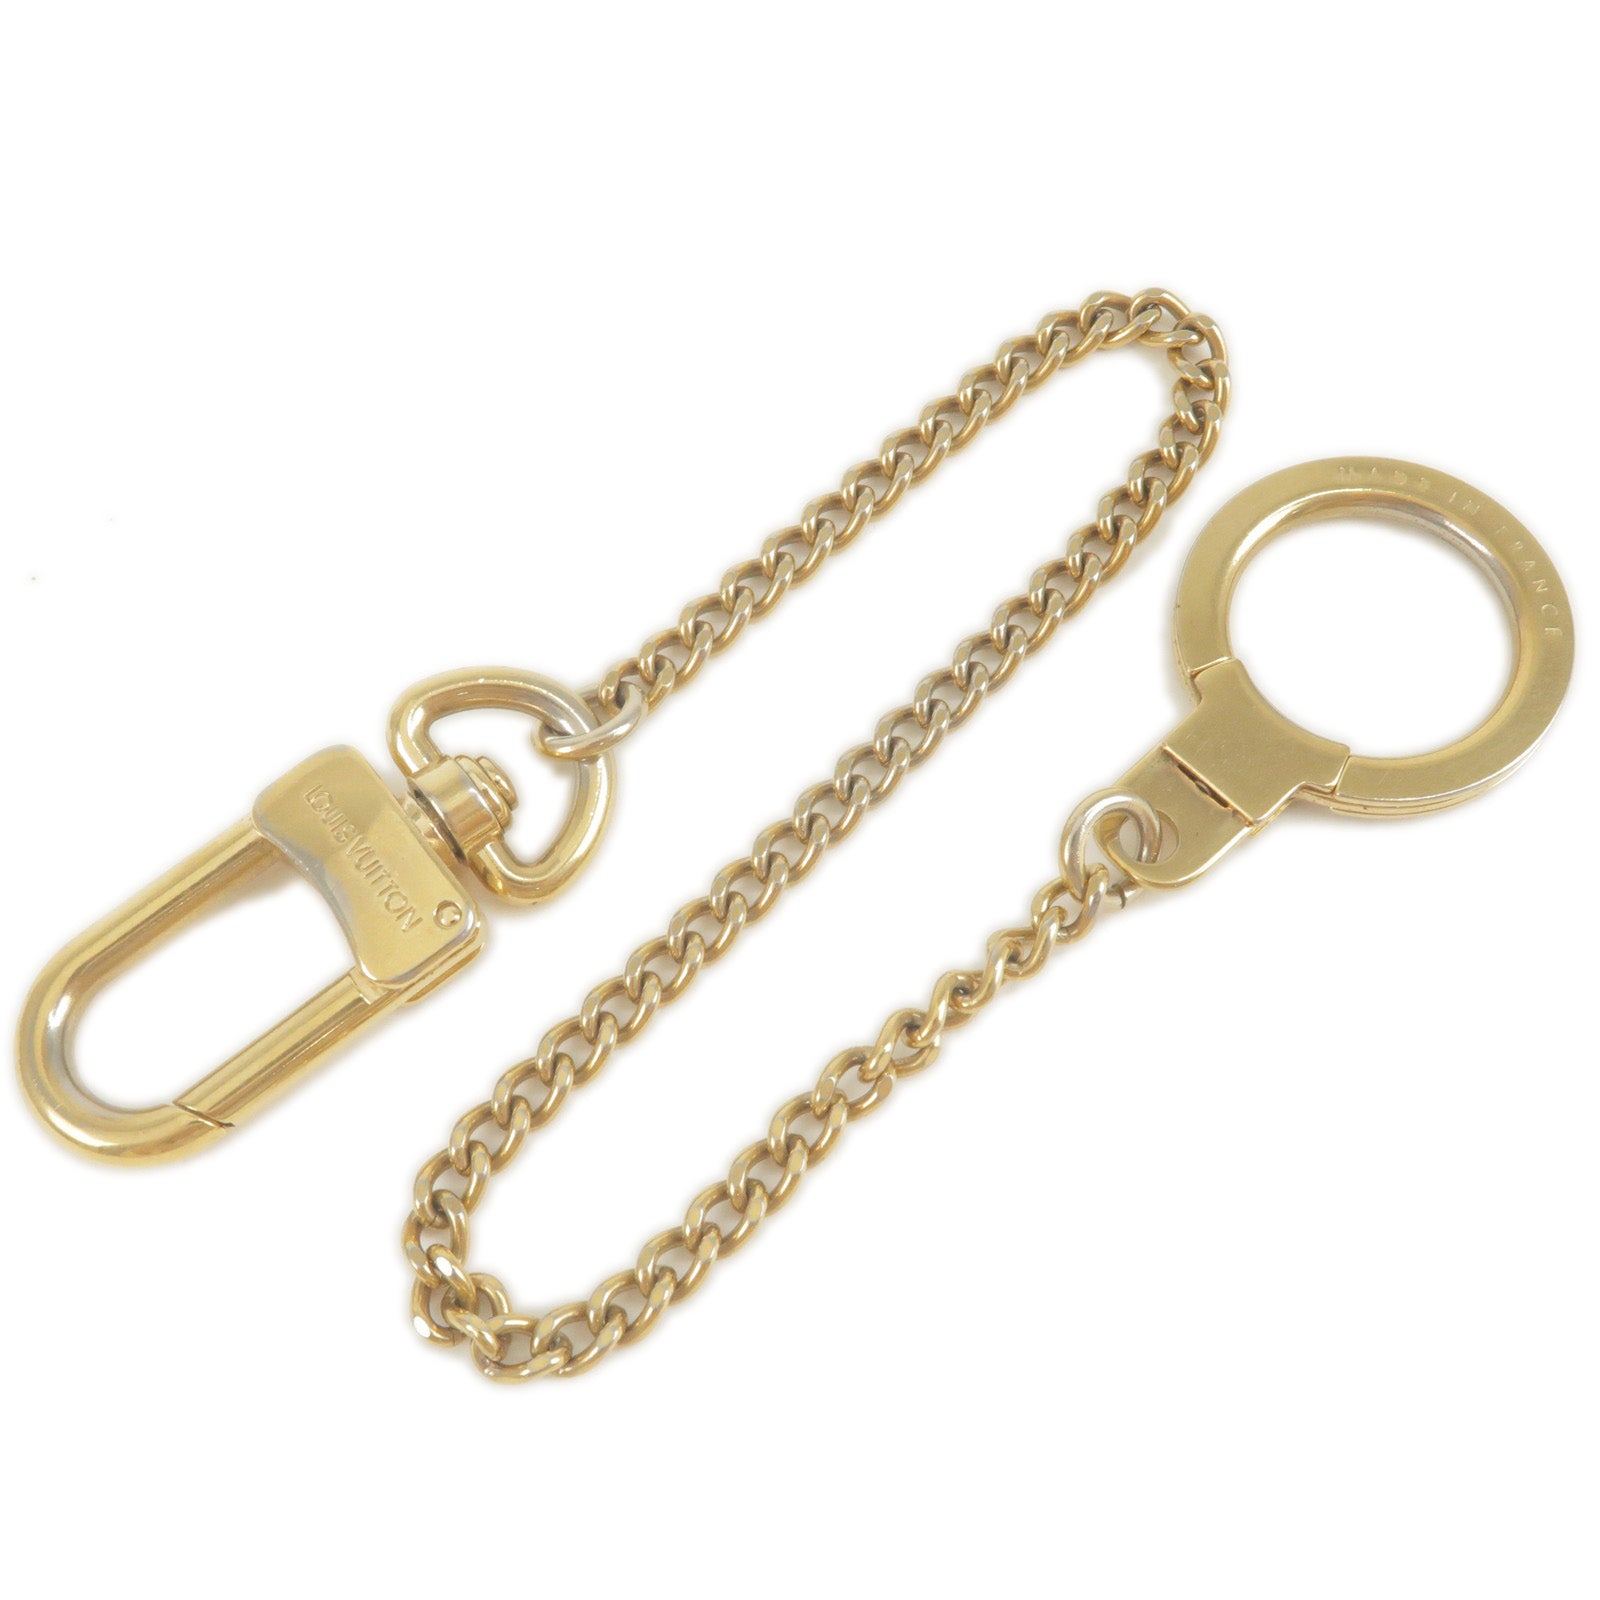 Louis Vuitton x Nigo Squared Necklace Gold in Gold Metal with Gold